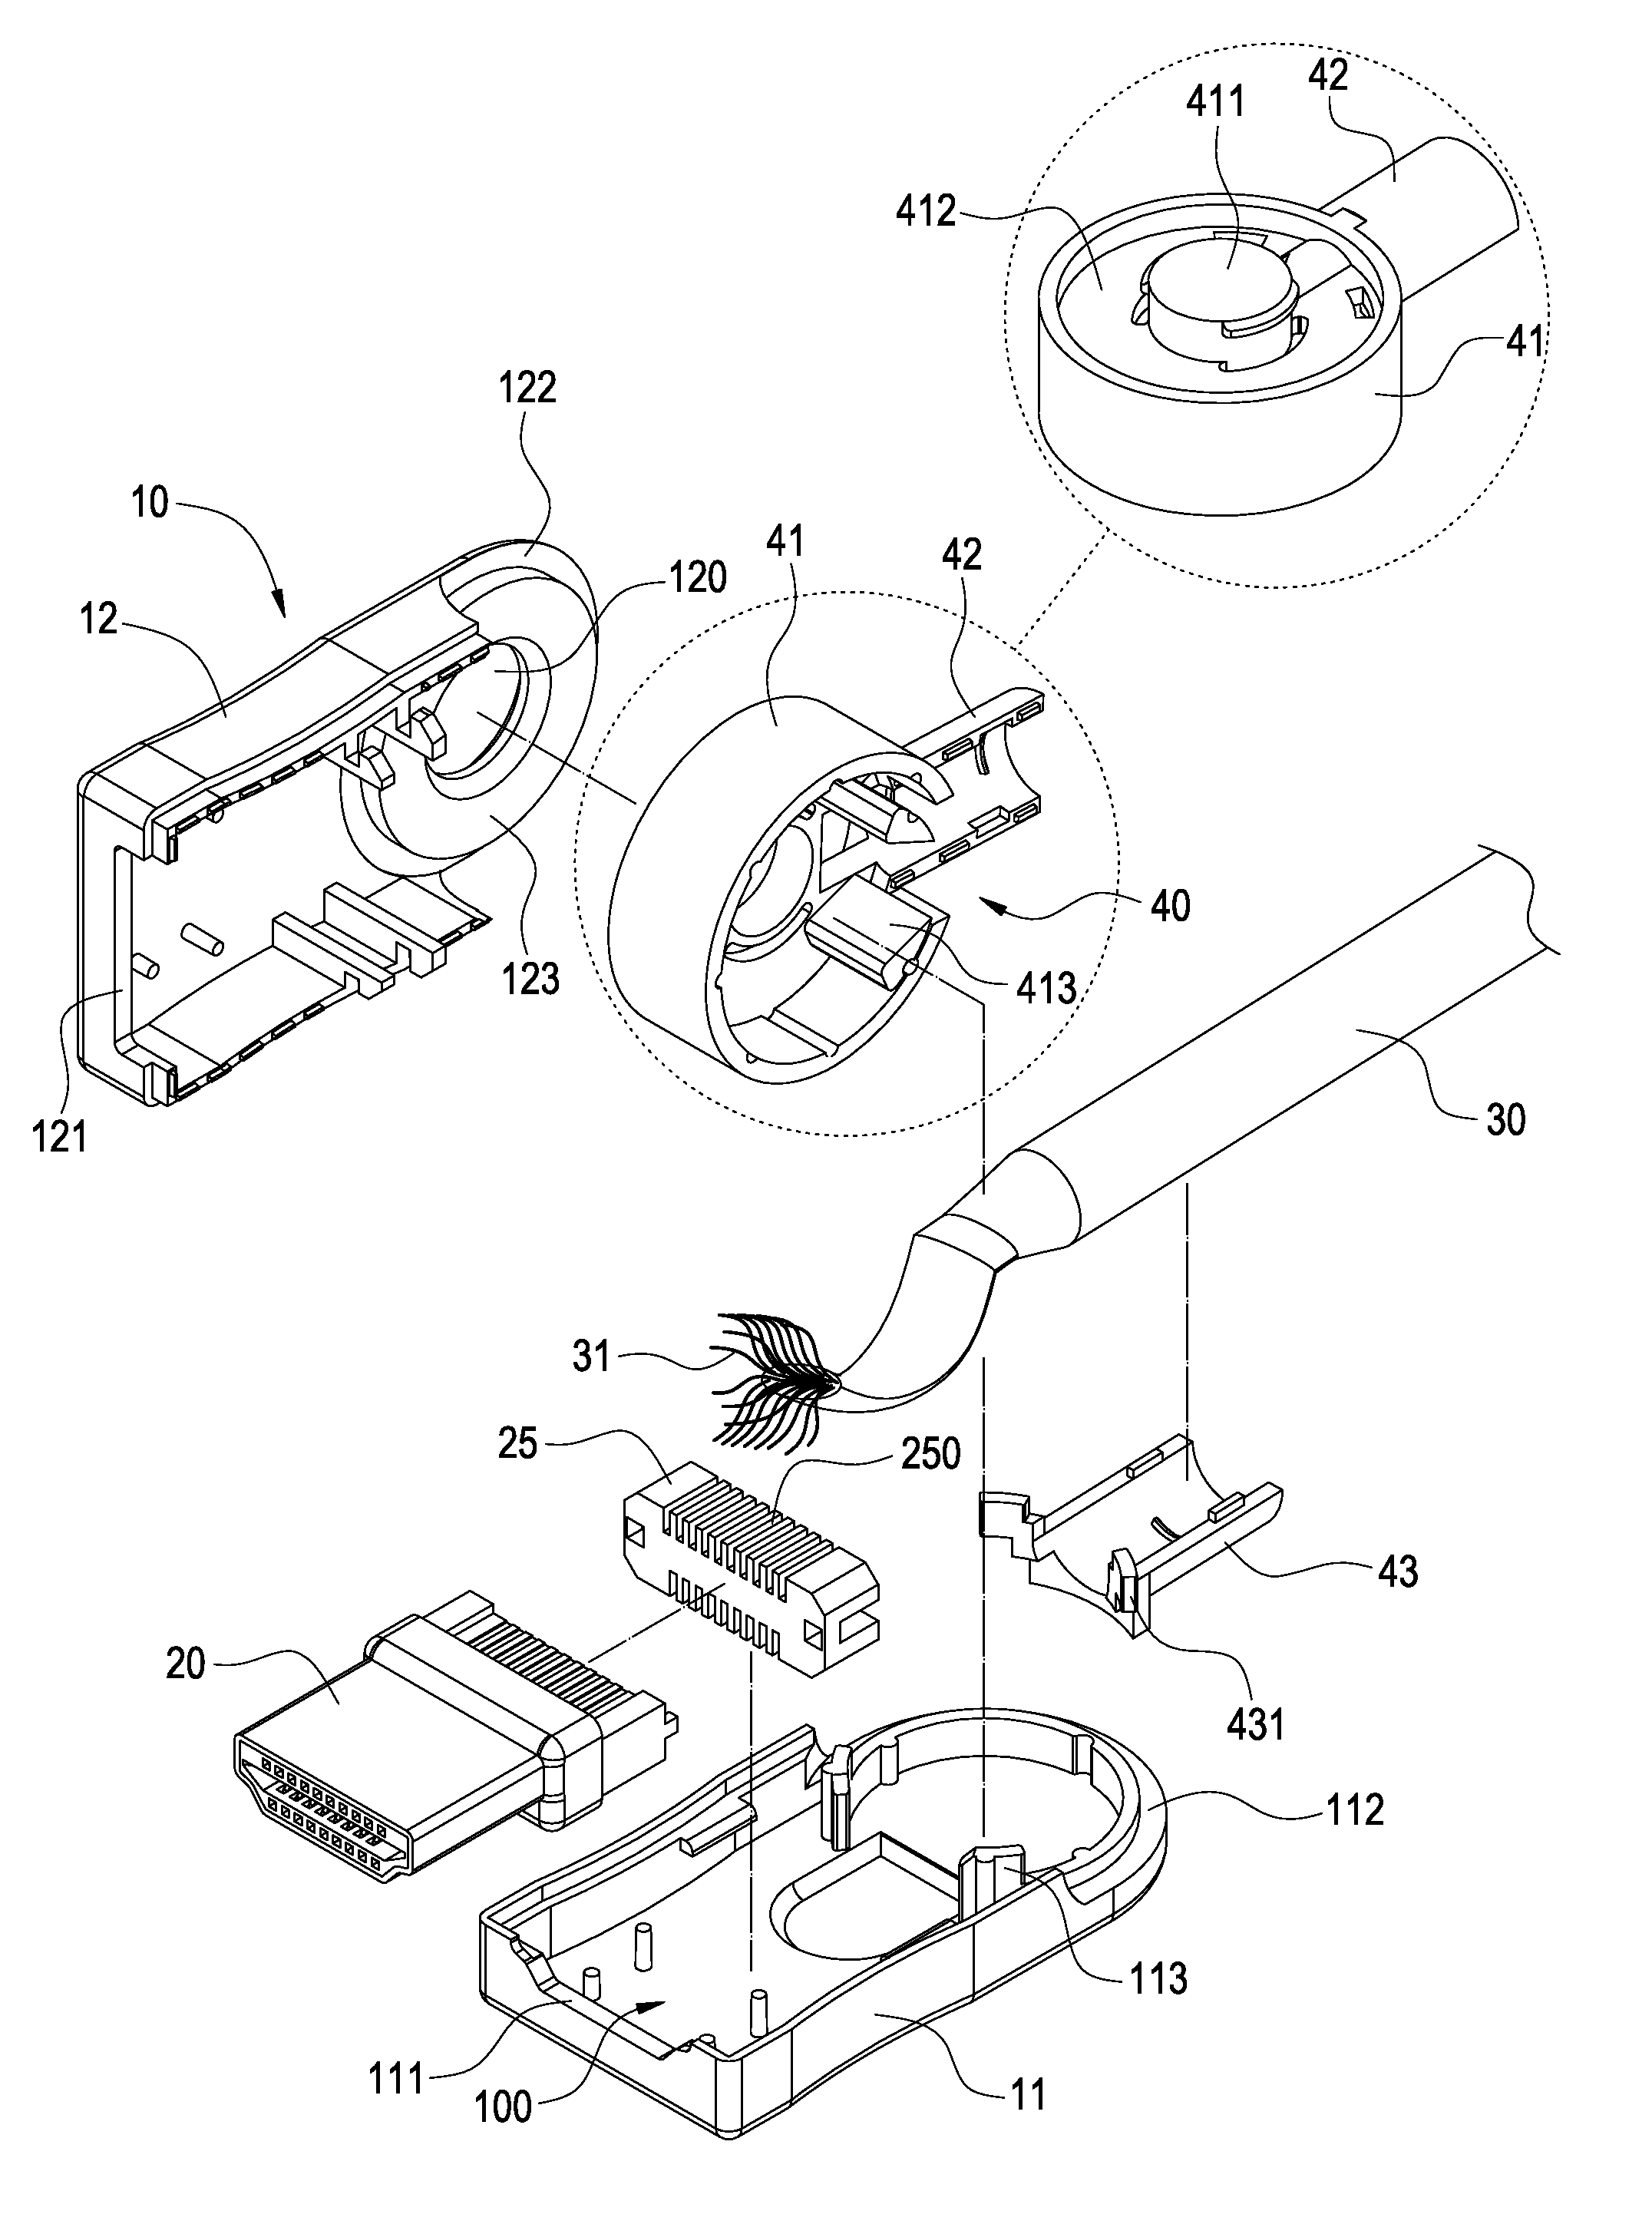 Transmission line with rotatable connector